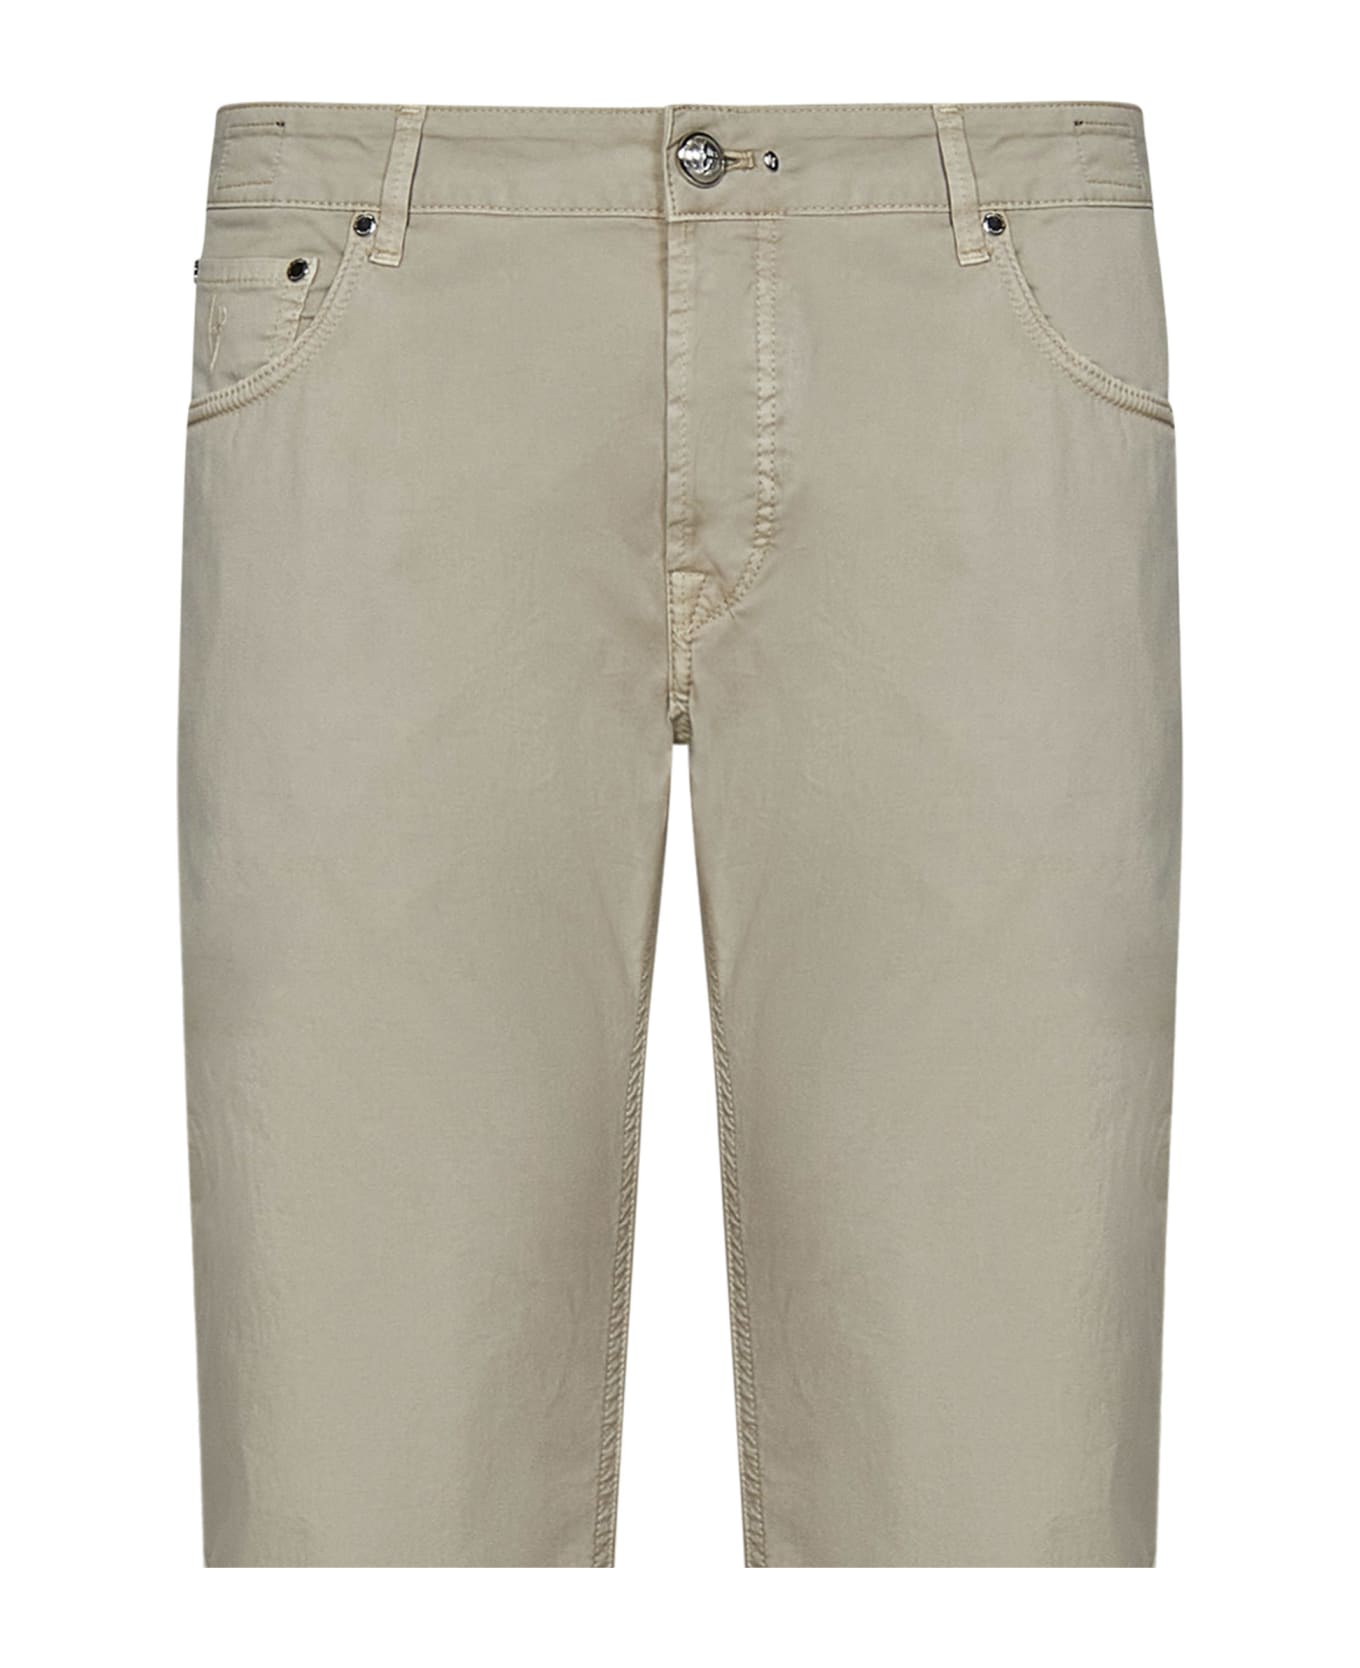 Hand Picked Handpicked Orvieto Trousers - Sand